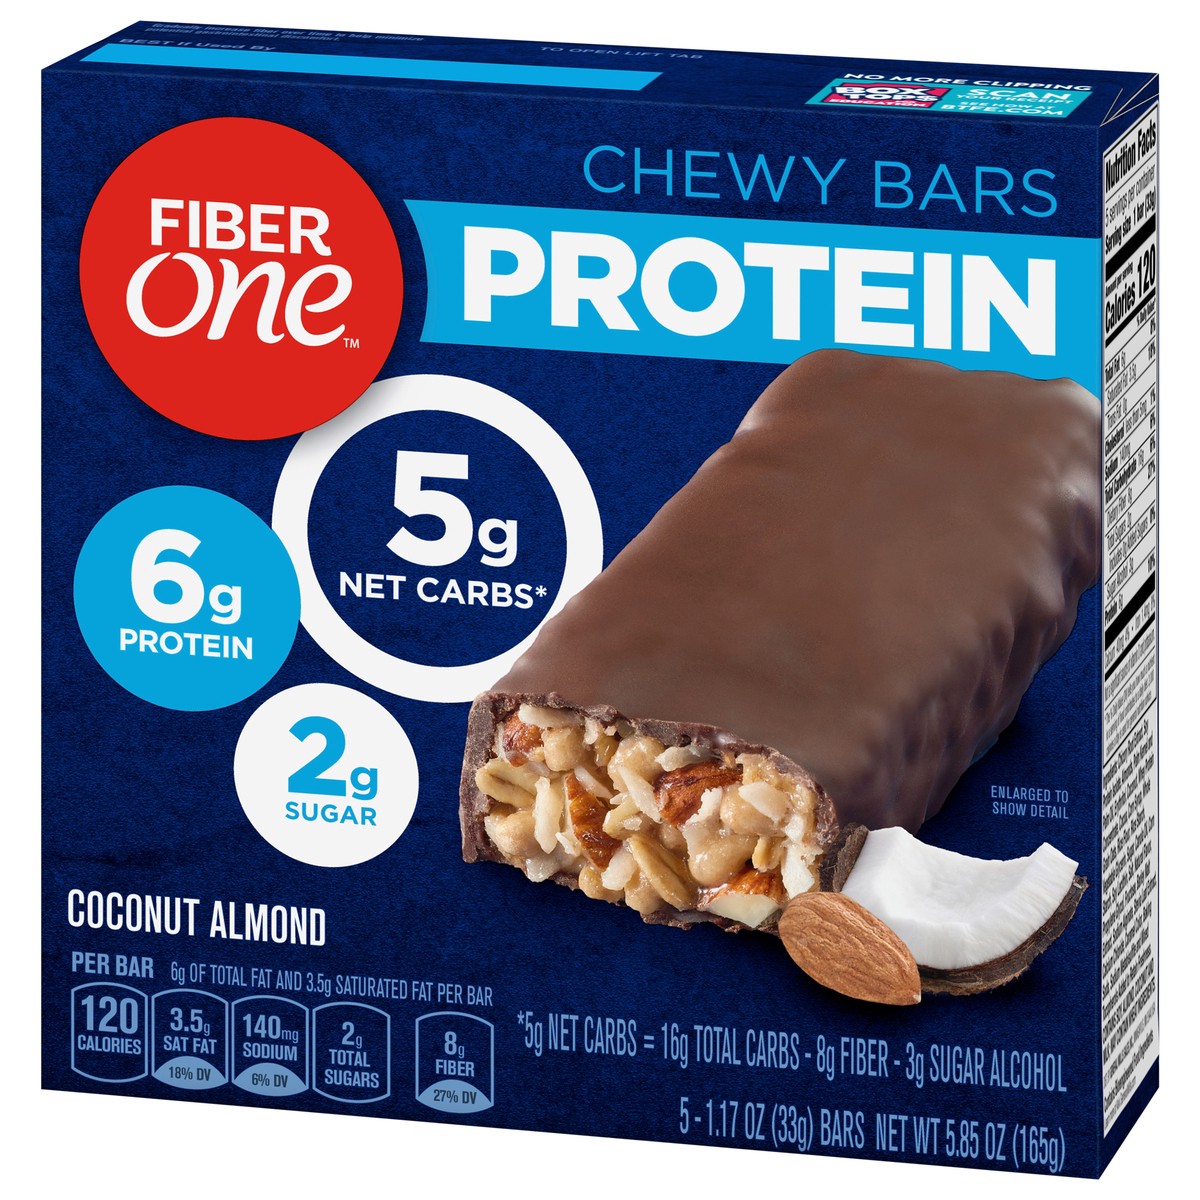 slide 3 of 9, Fiber One Protein Bar, Coconut Almond, Chewy Bars, 6g Protein, Snacks, 5 ct., 5 ct